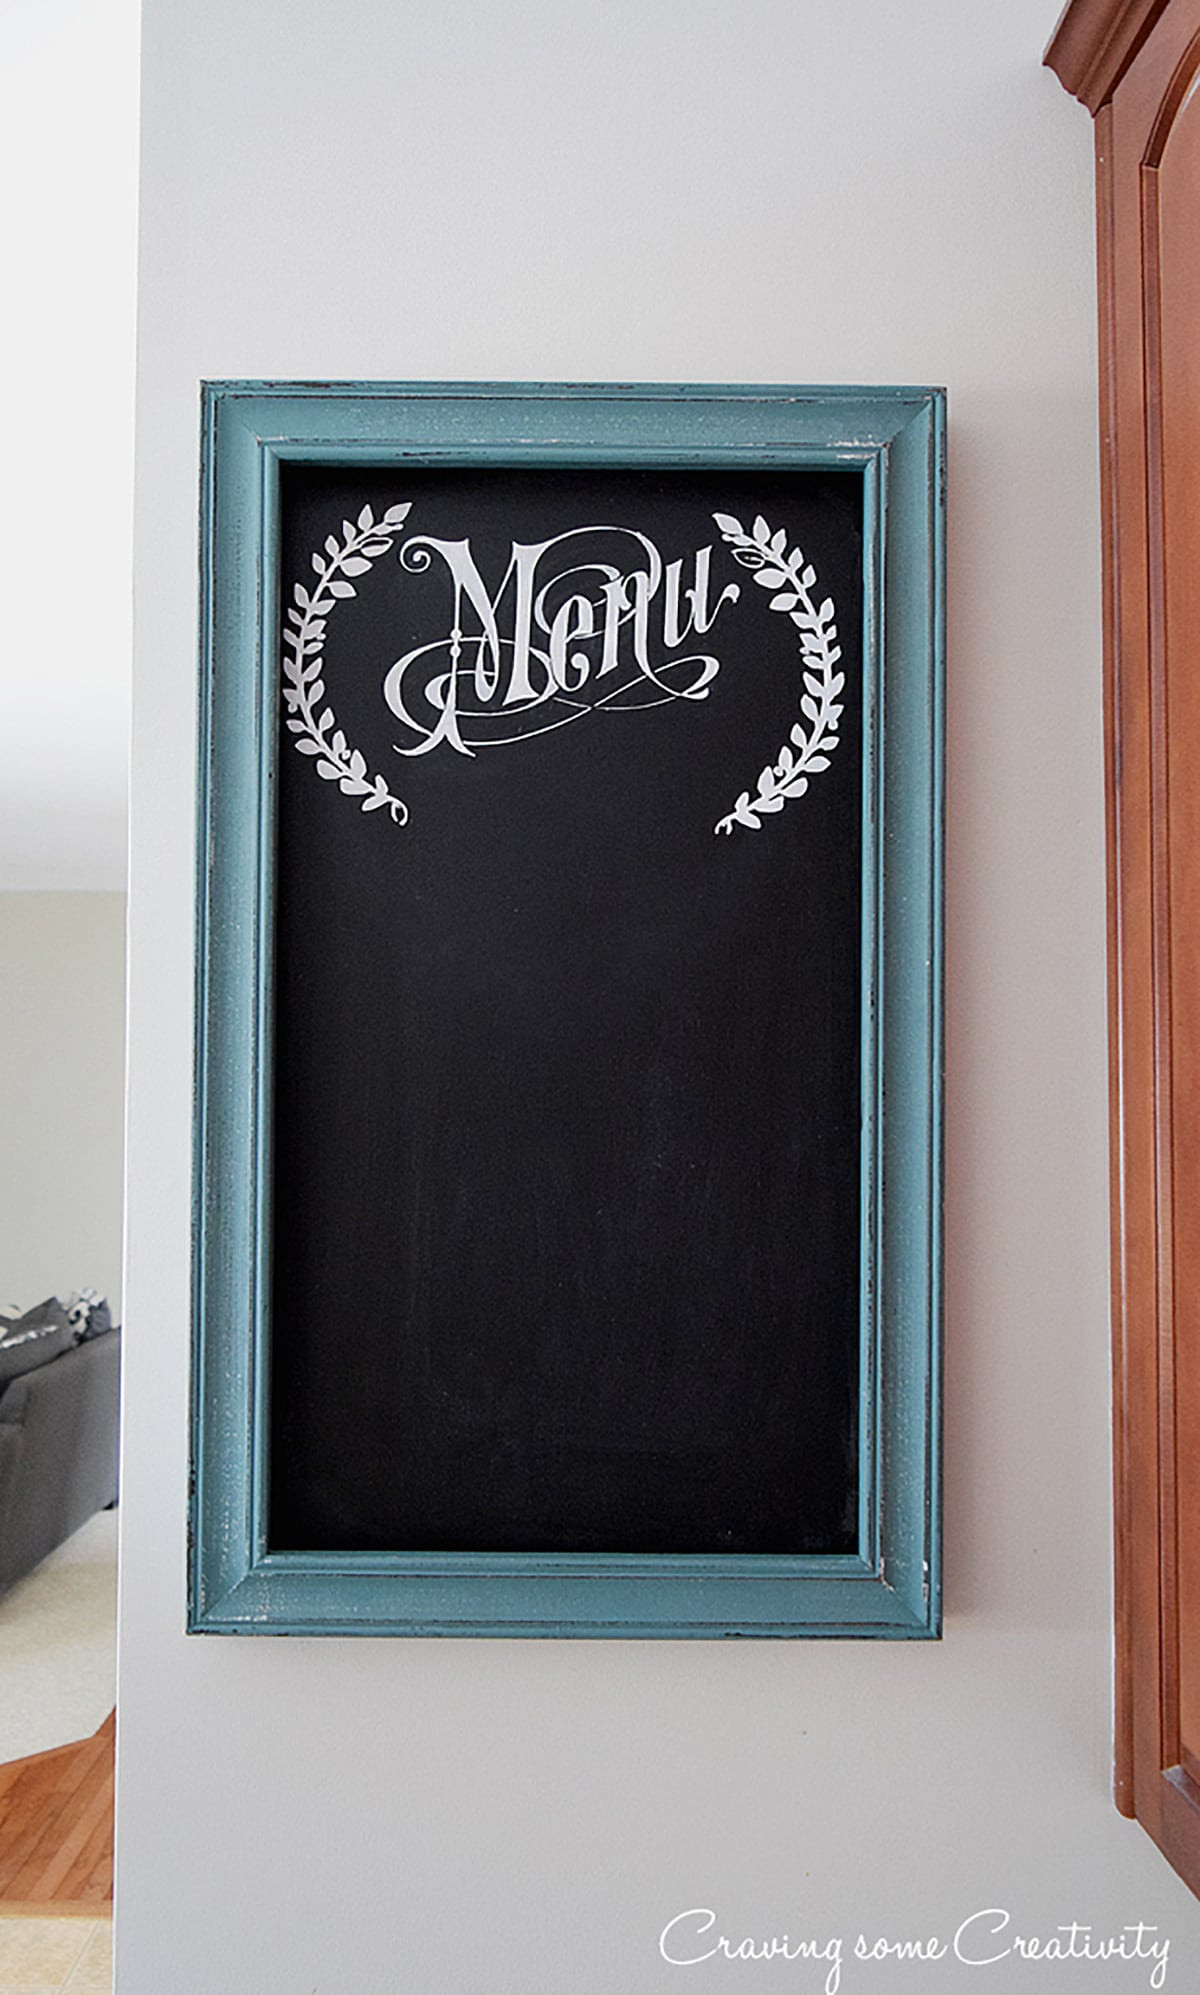 Kitchen Chalkboard Wall Ideas
 How to Paint a Chalkboard Menu for the Kitchen Wall